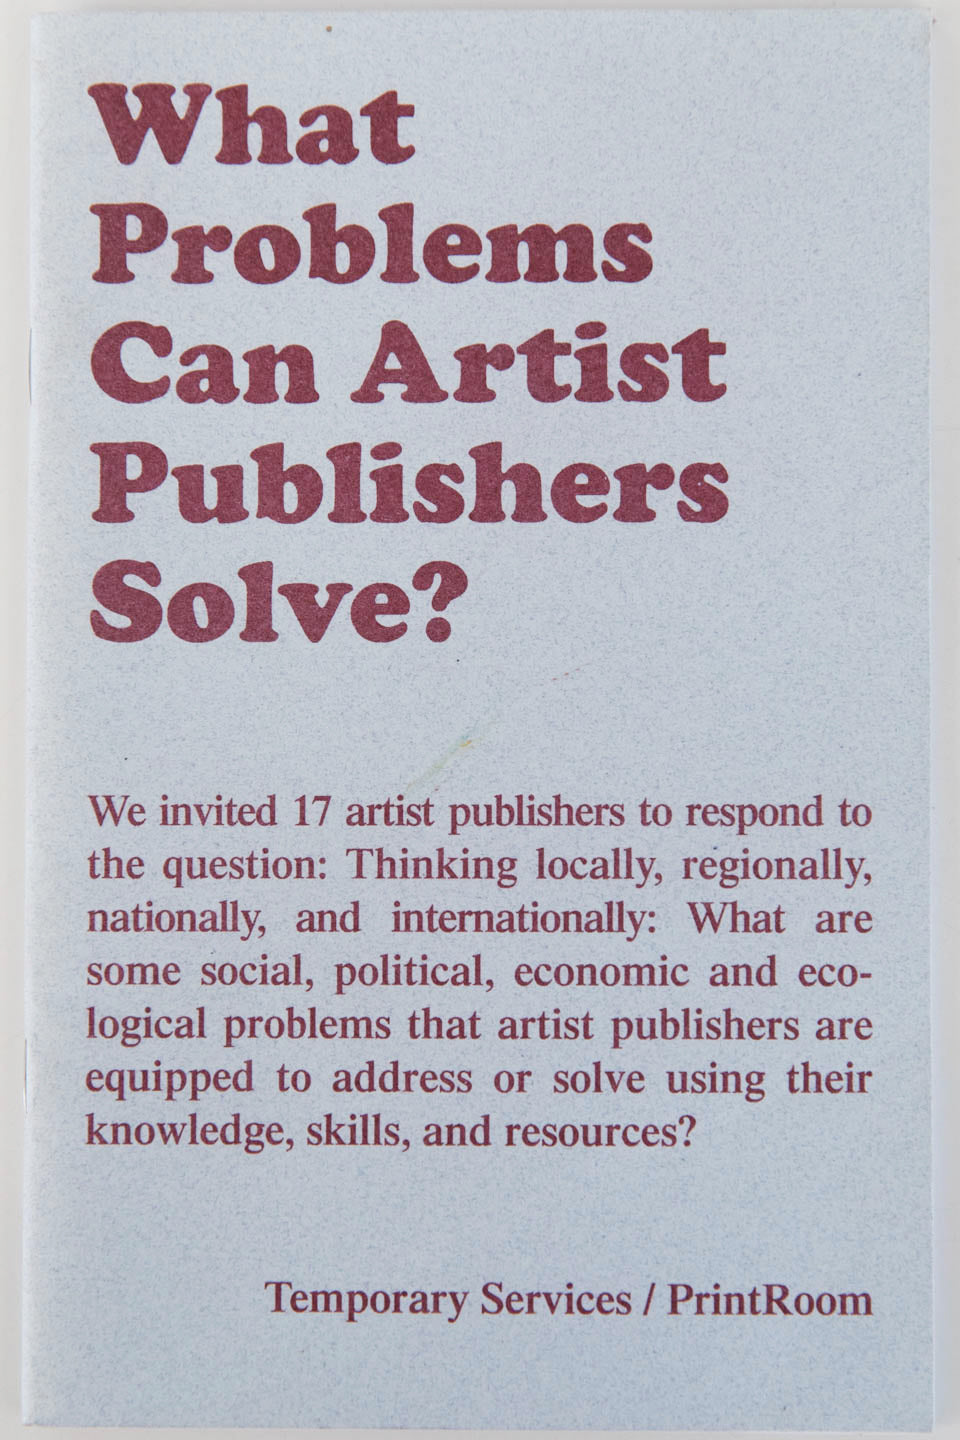 WHAT PROBLEMS CAN ARTIST PUBLISHERS SOLVE?